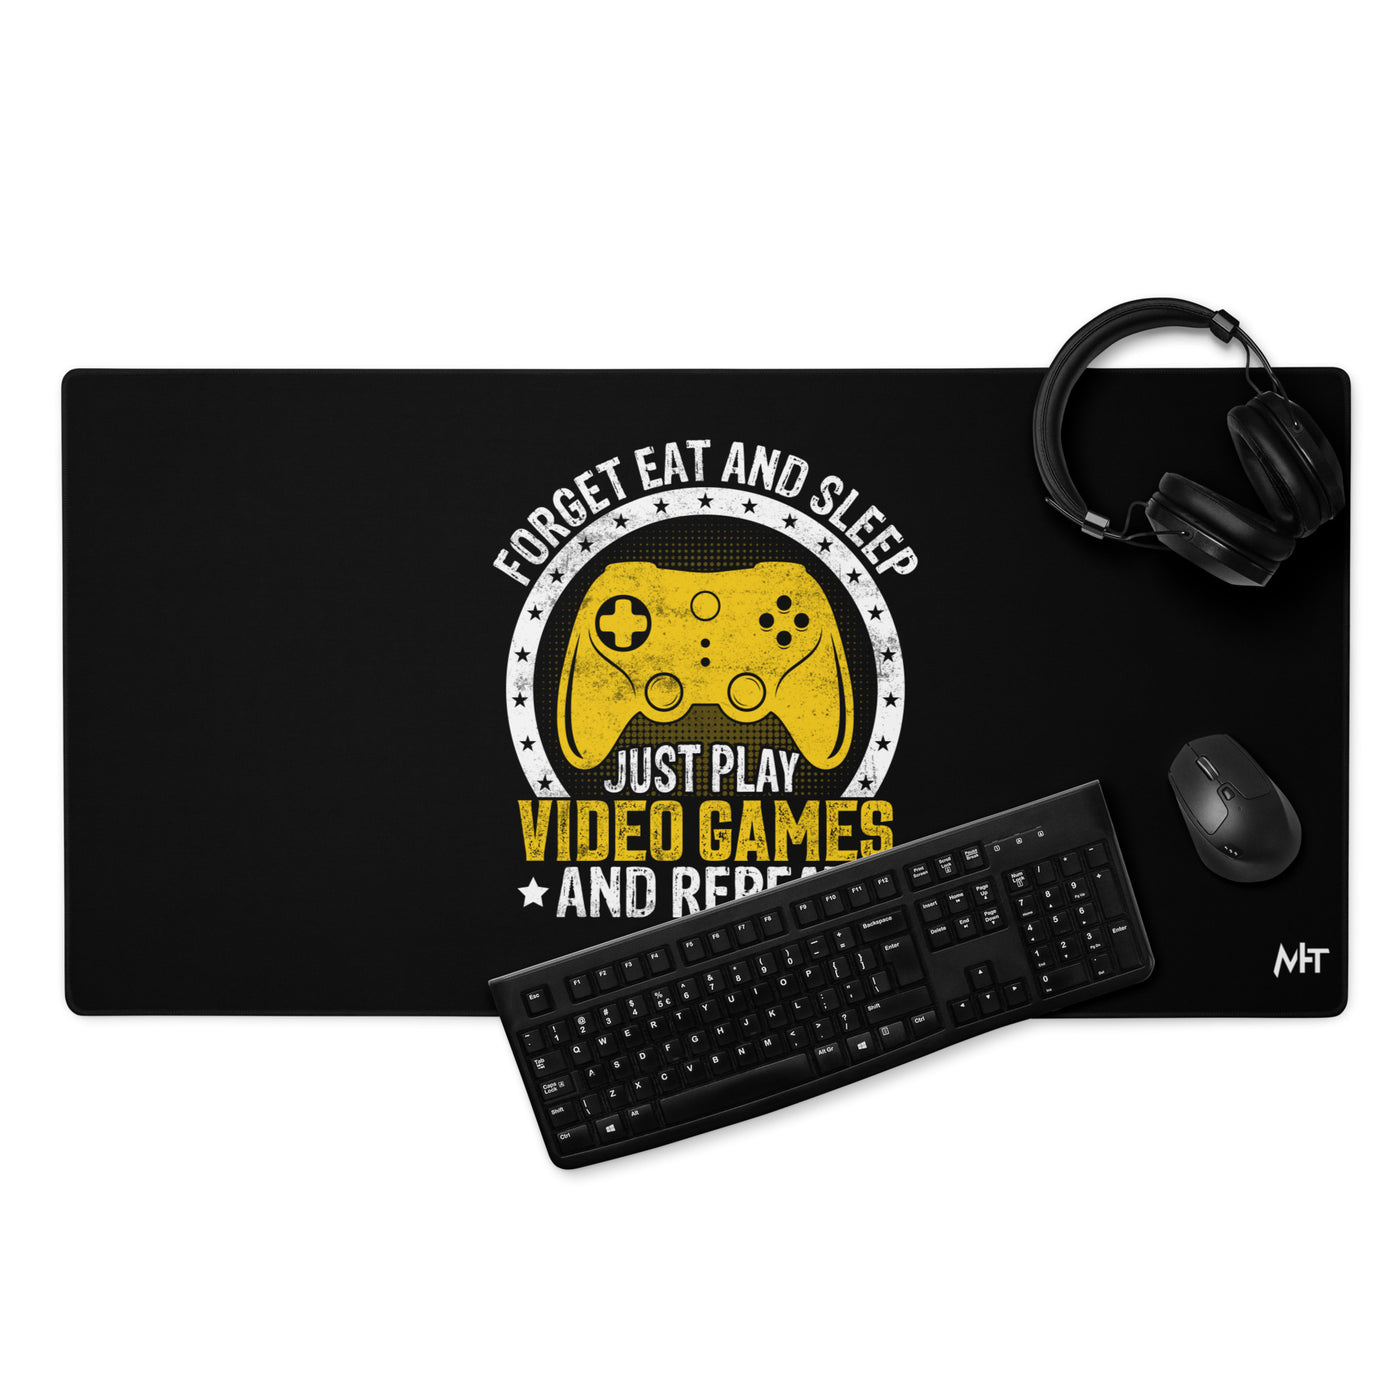 Forget Eat and Sleep, just Play Video Games and Repeat Desk Mat